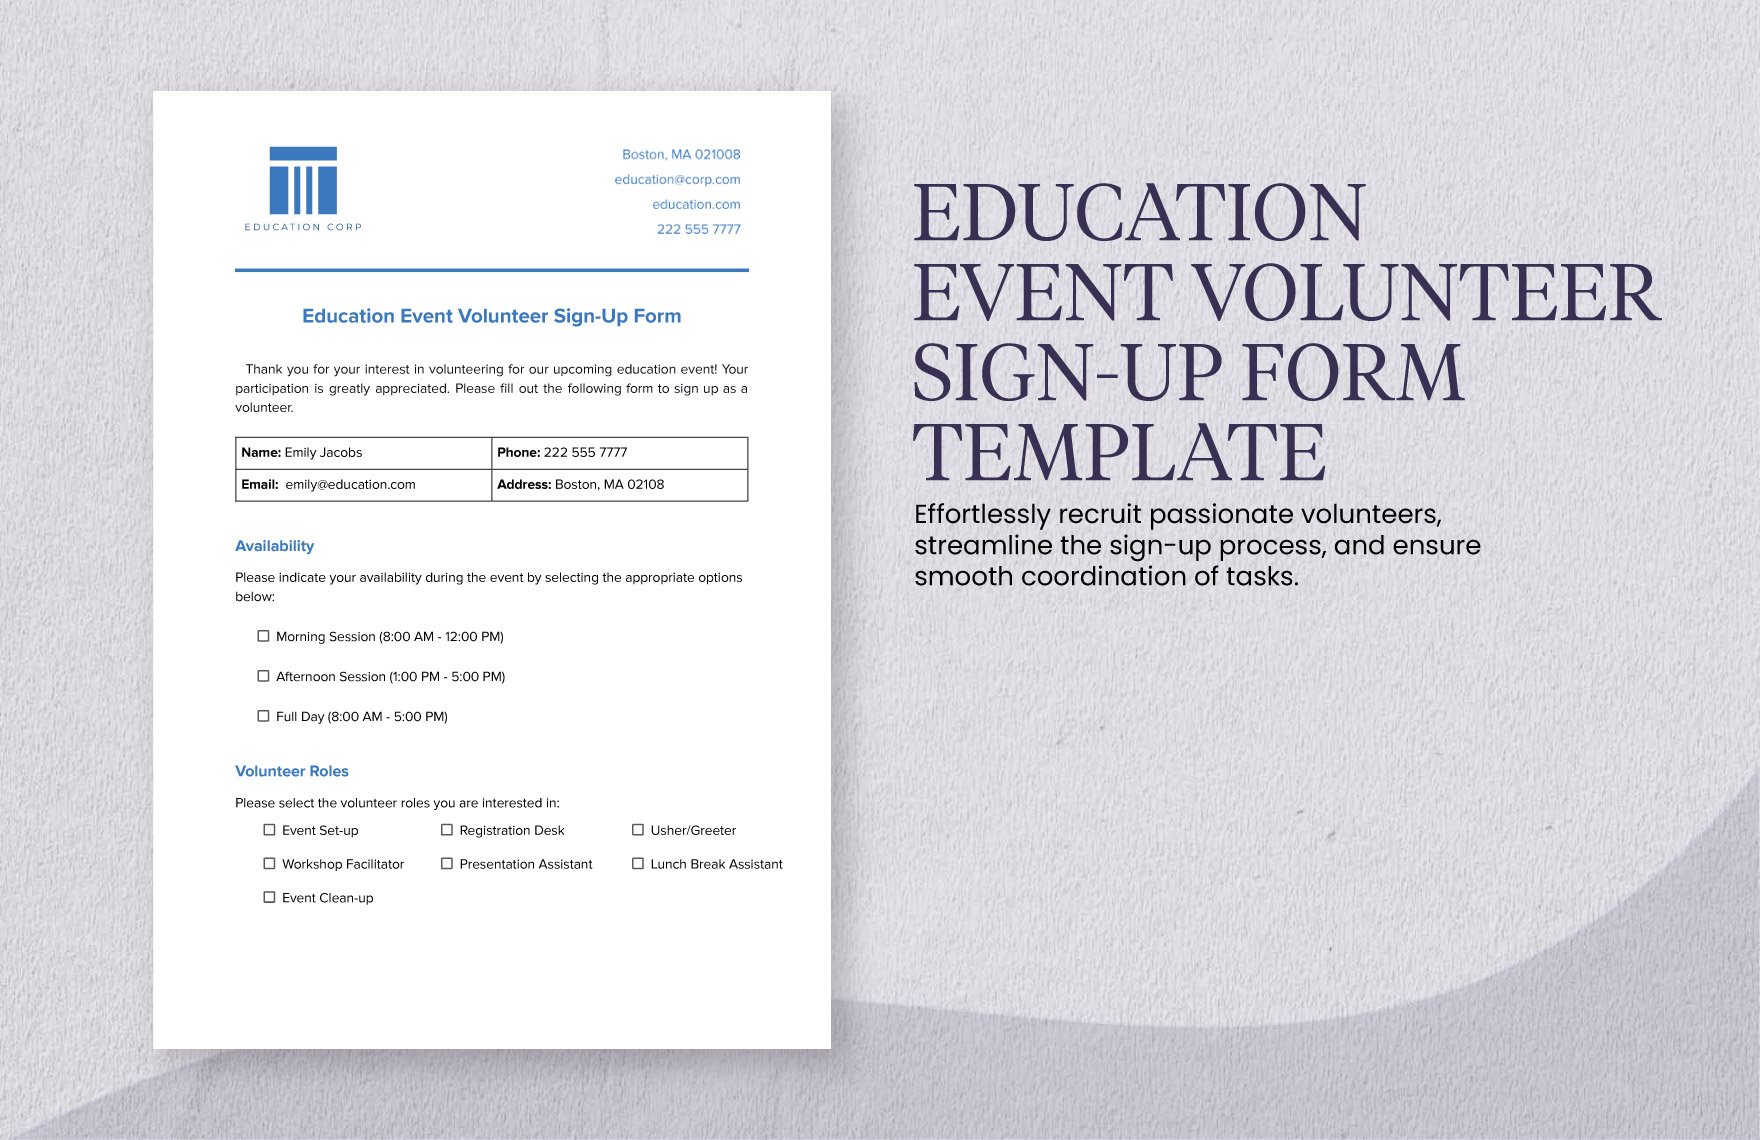 Education Event Volunteer Sign-Up Form Template